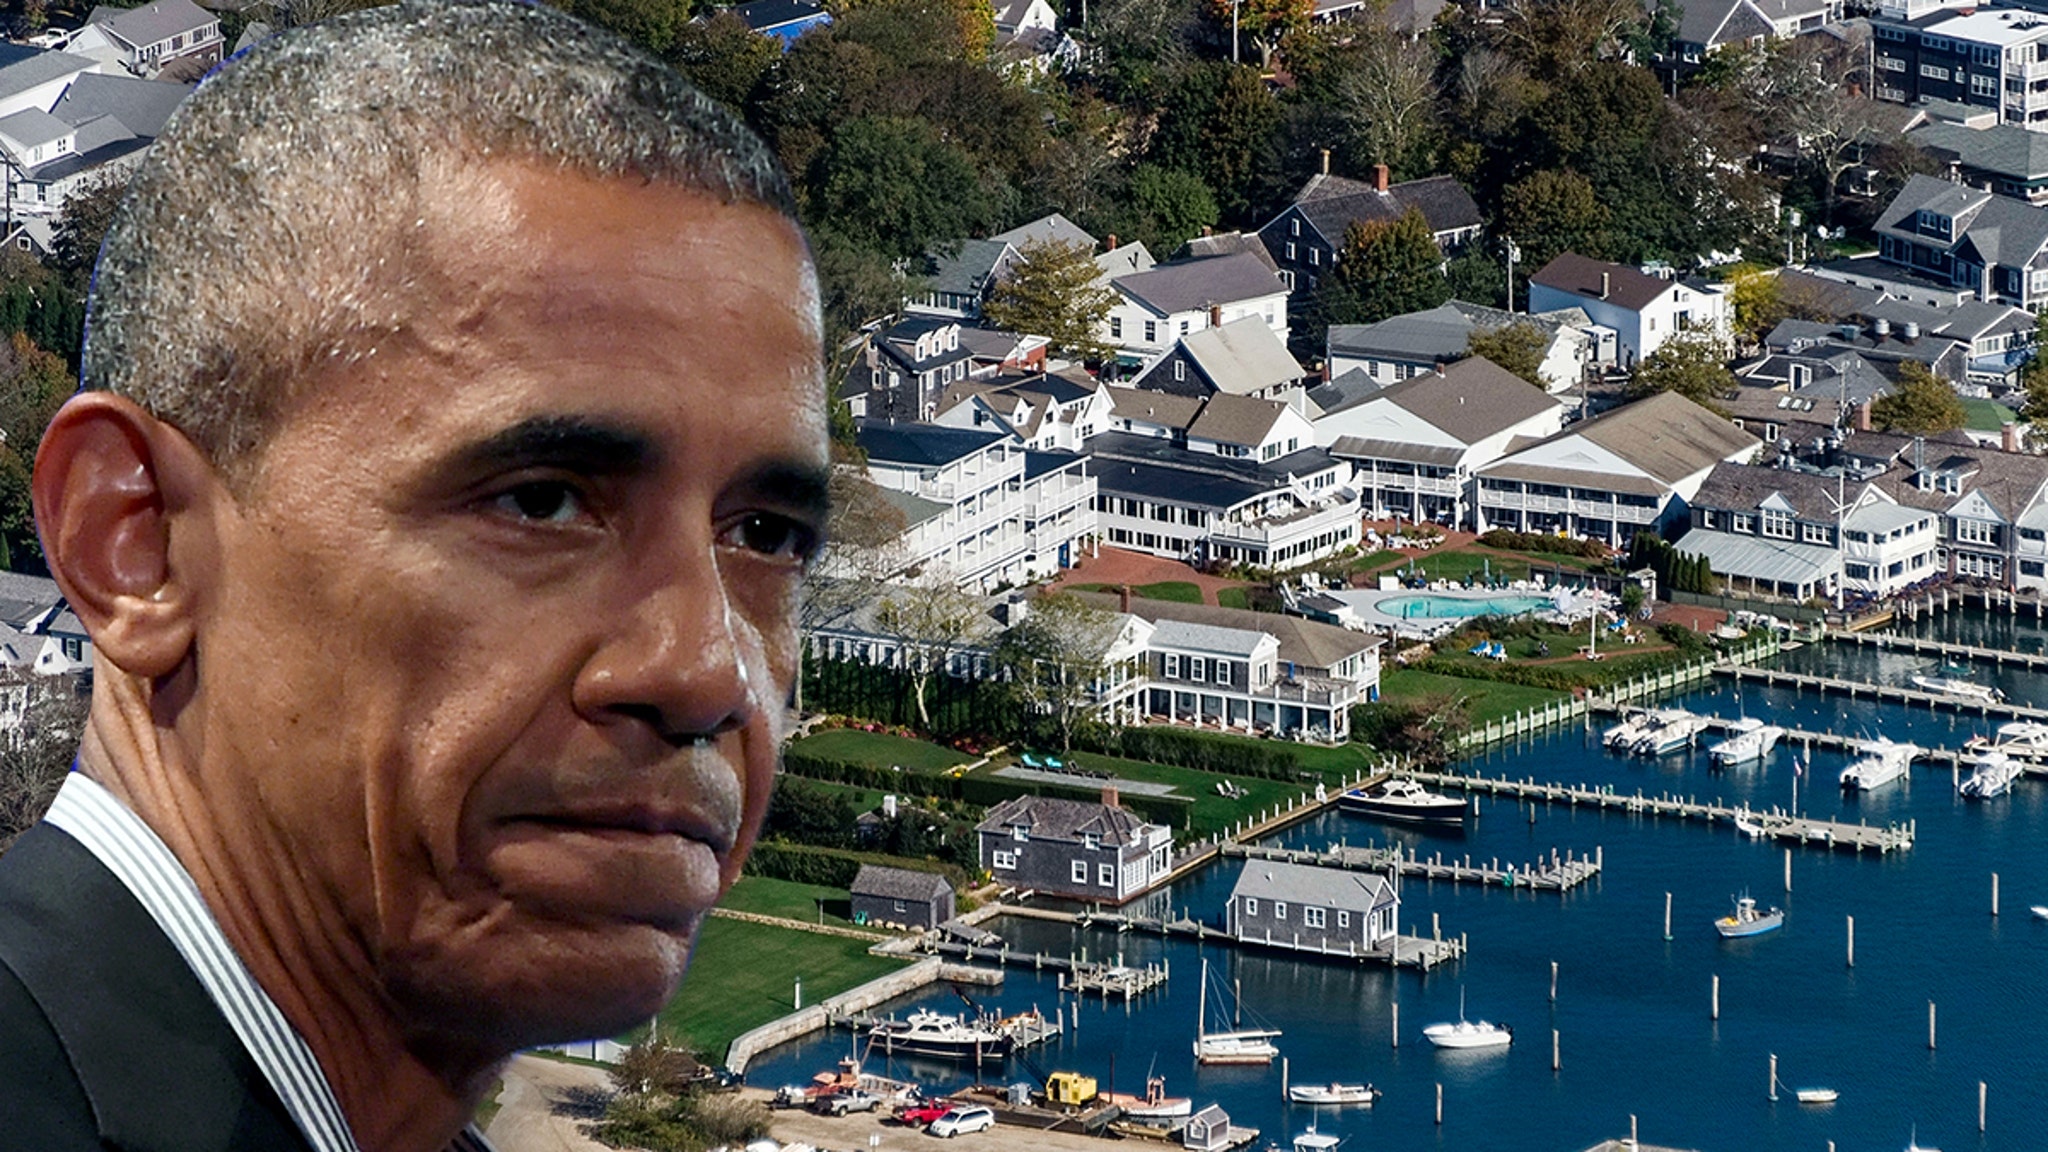 Obama's Last-Minute Party Cancelation Could Screw Would-Be Guests